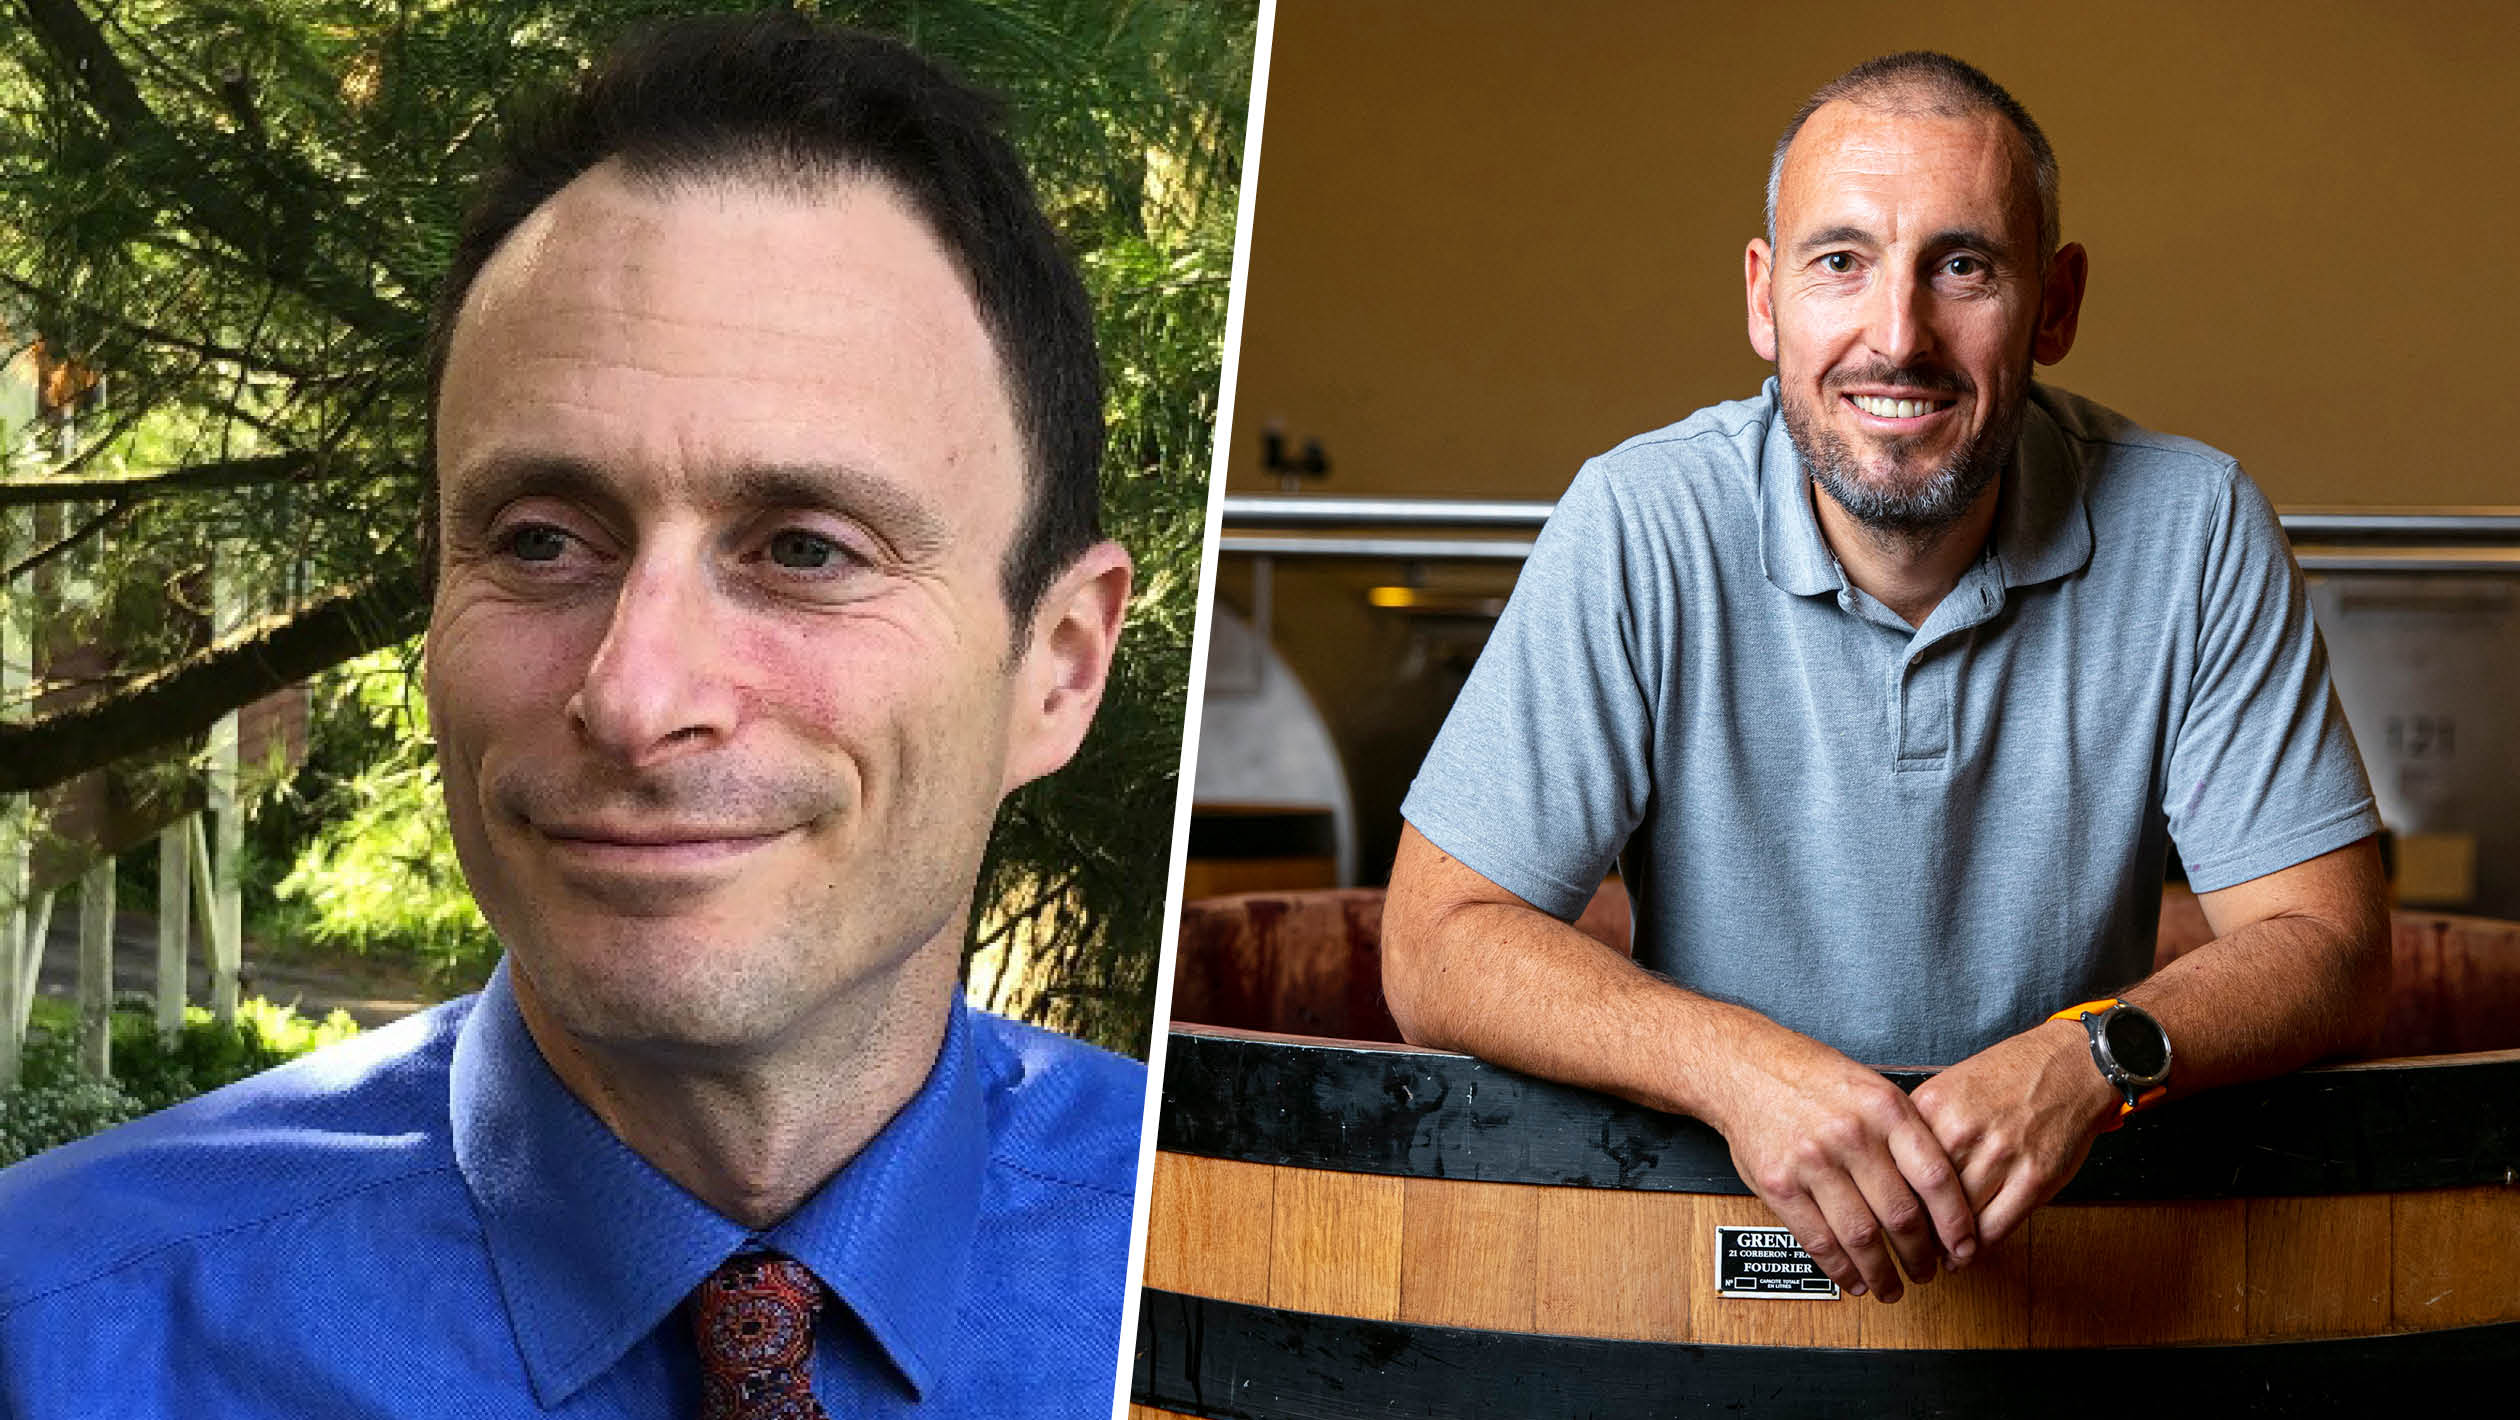 From left to right Gavin Lee Sacks, professor of food science in the College of Agriculture and Life Sciences at Cornell University (photo courtesy of Gavin Lee Sacks); Frederic Barnier, winemaker at Maison Louis Jadot (photo credit: Thomas Alexander). 